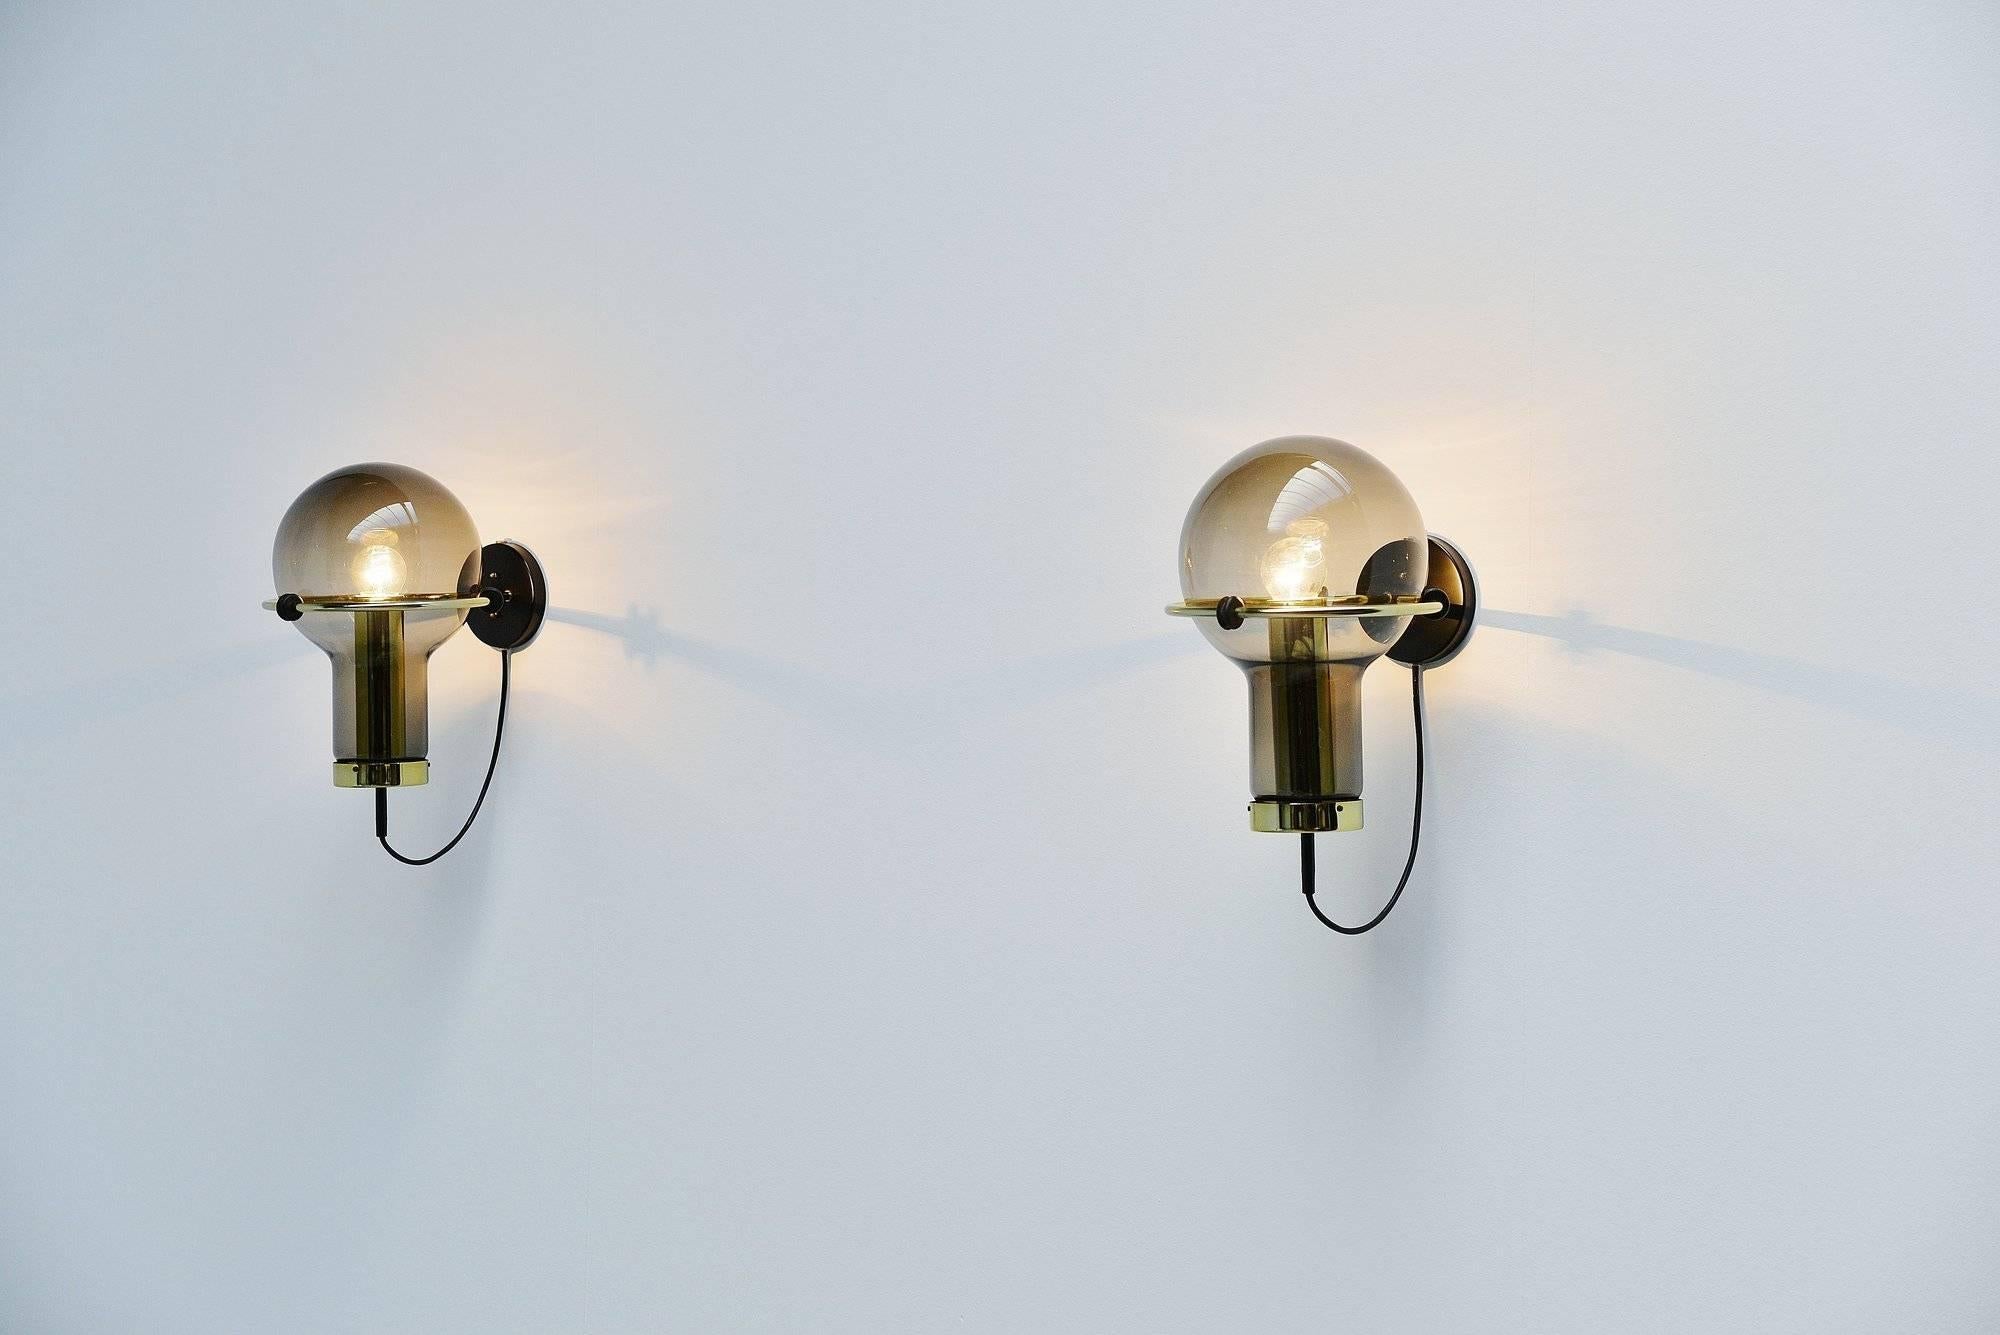 Very nice set of seven maxi globe wall lamps designed and made by RAAK Amsterdam, Holland, 1965. These lamps are called maxi globes and this is the smallest version available but still large for a wall lamp. The lamps have brown grey fume glass and